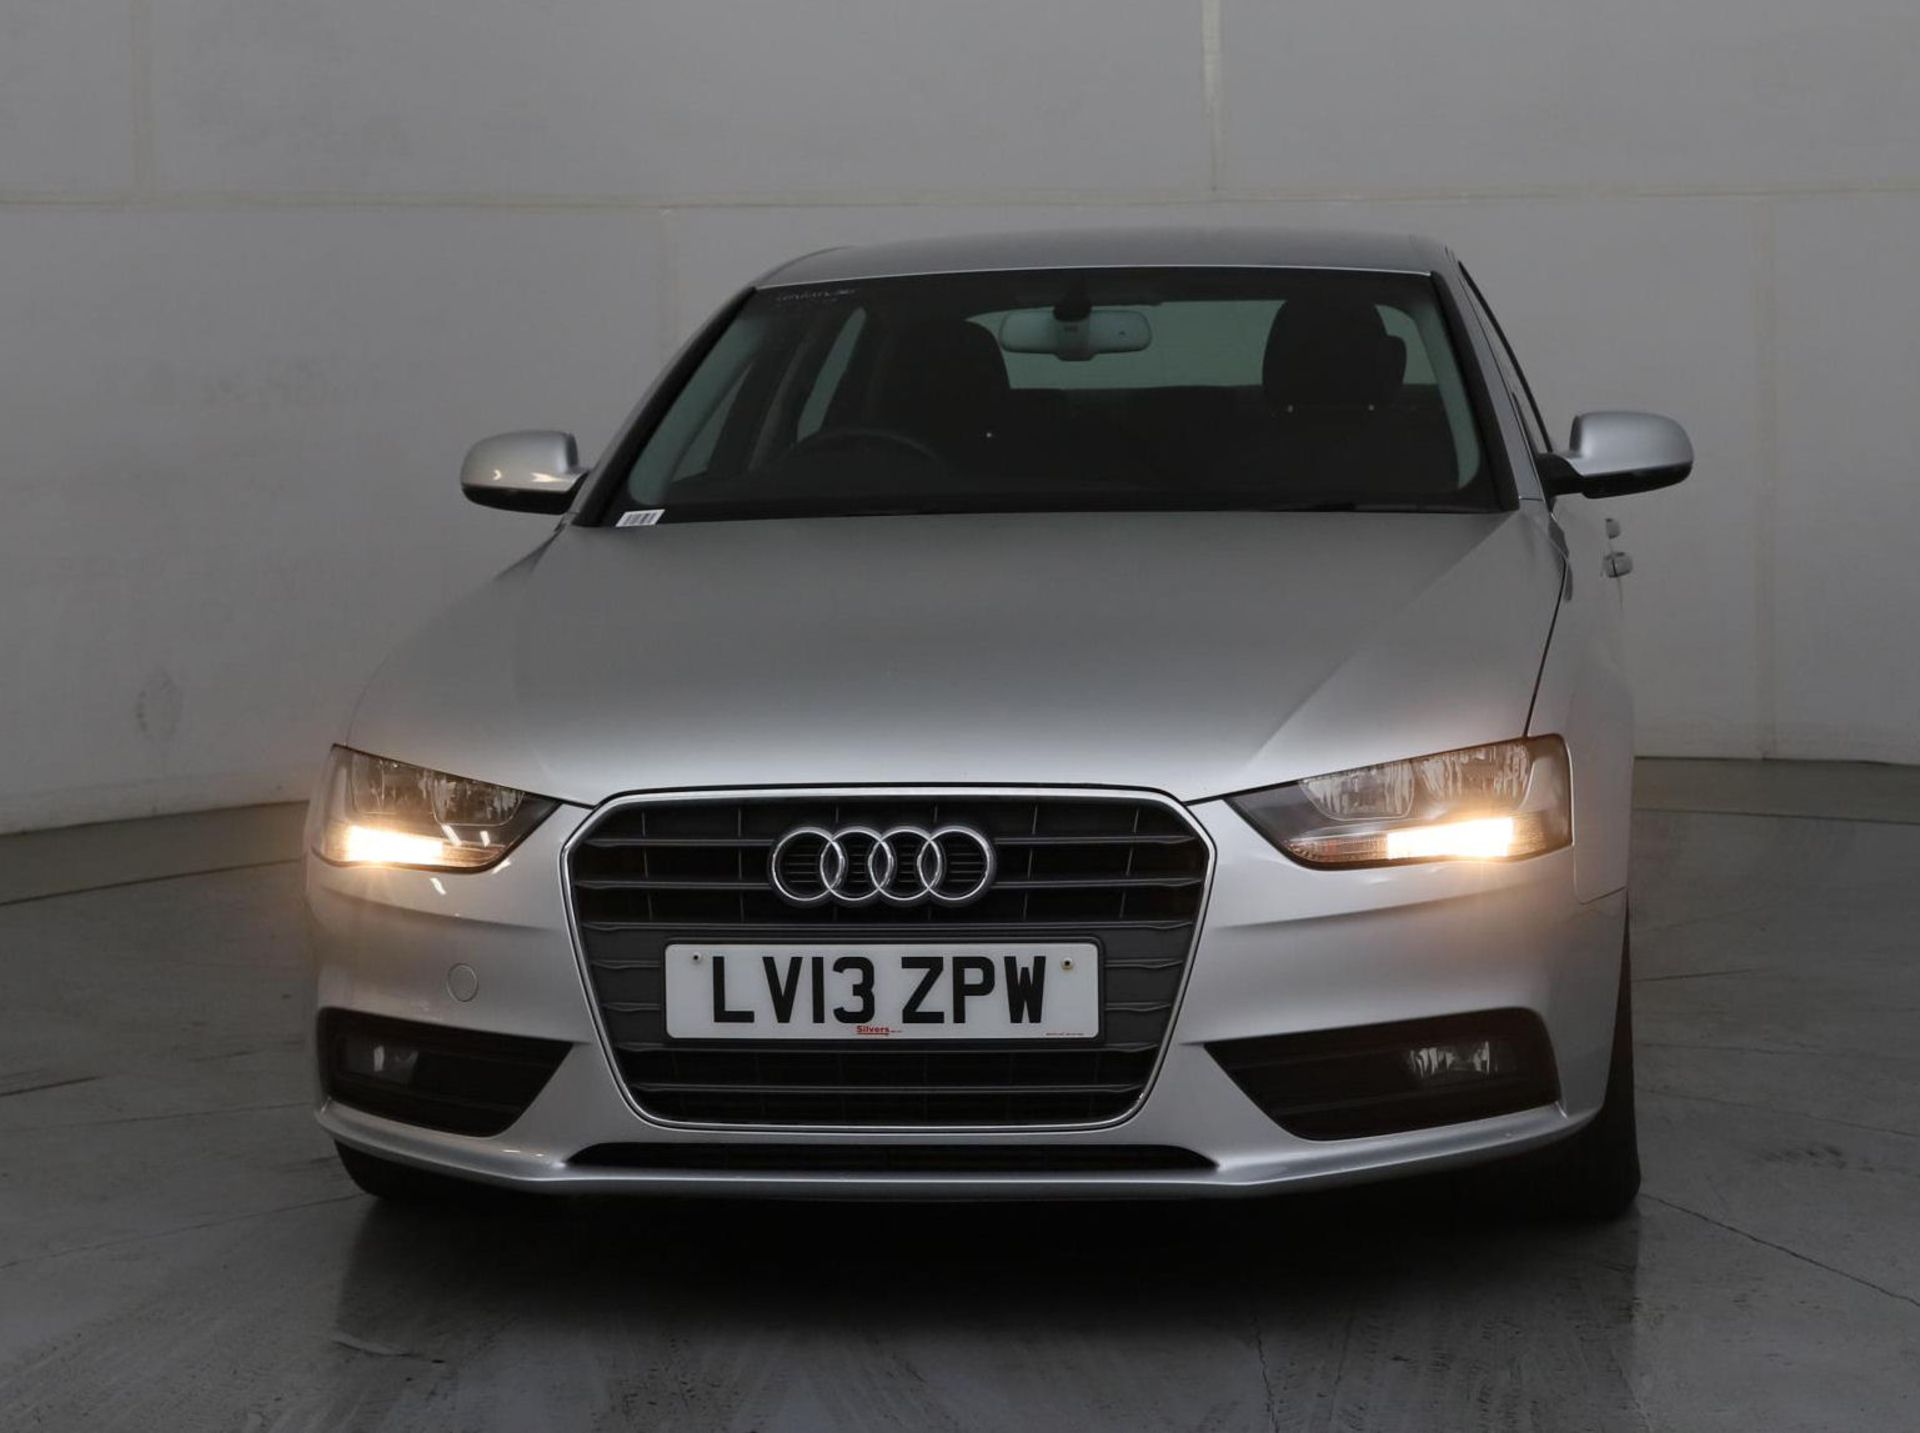 2013 Audi A4 2.0 Tdi SE 4 Door Saloon - CL505 - NO VAT ON THE HAMMER - Location: Corby - Image 8 of 12